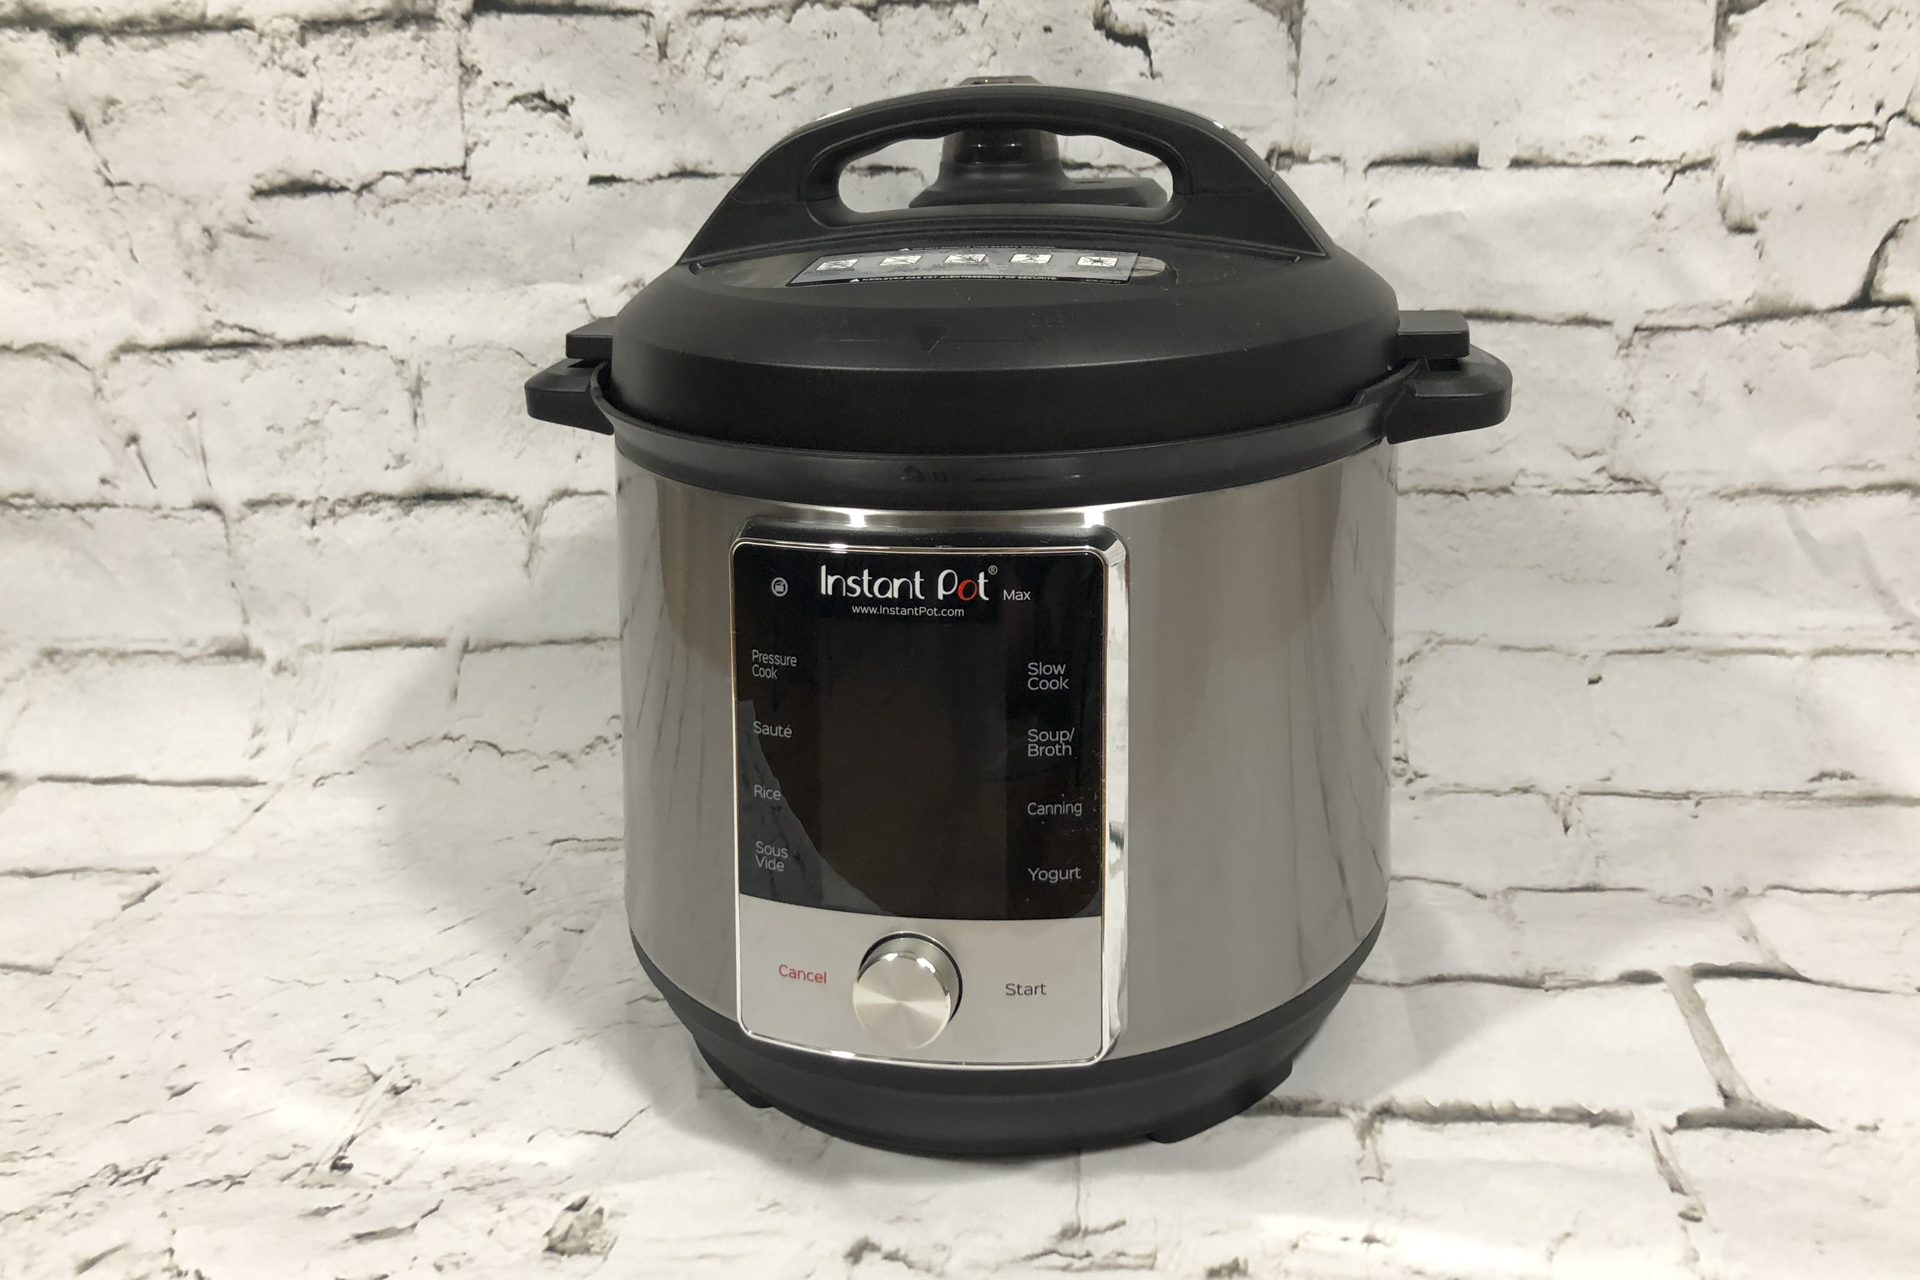 The new Instant Pot Max has a home canning feature. Is it safe? - CNET